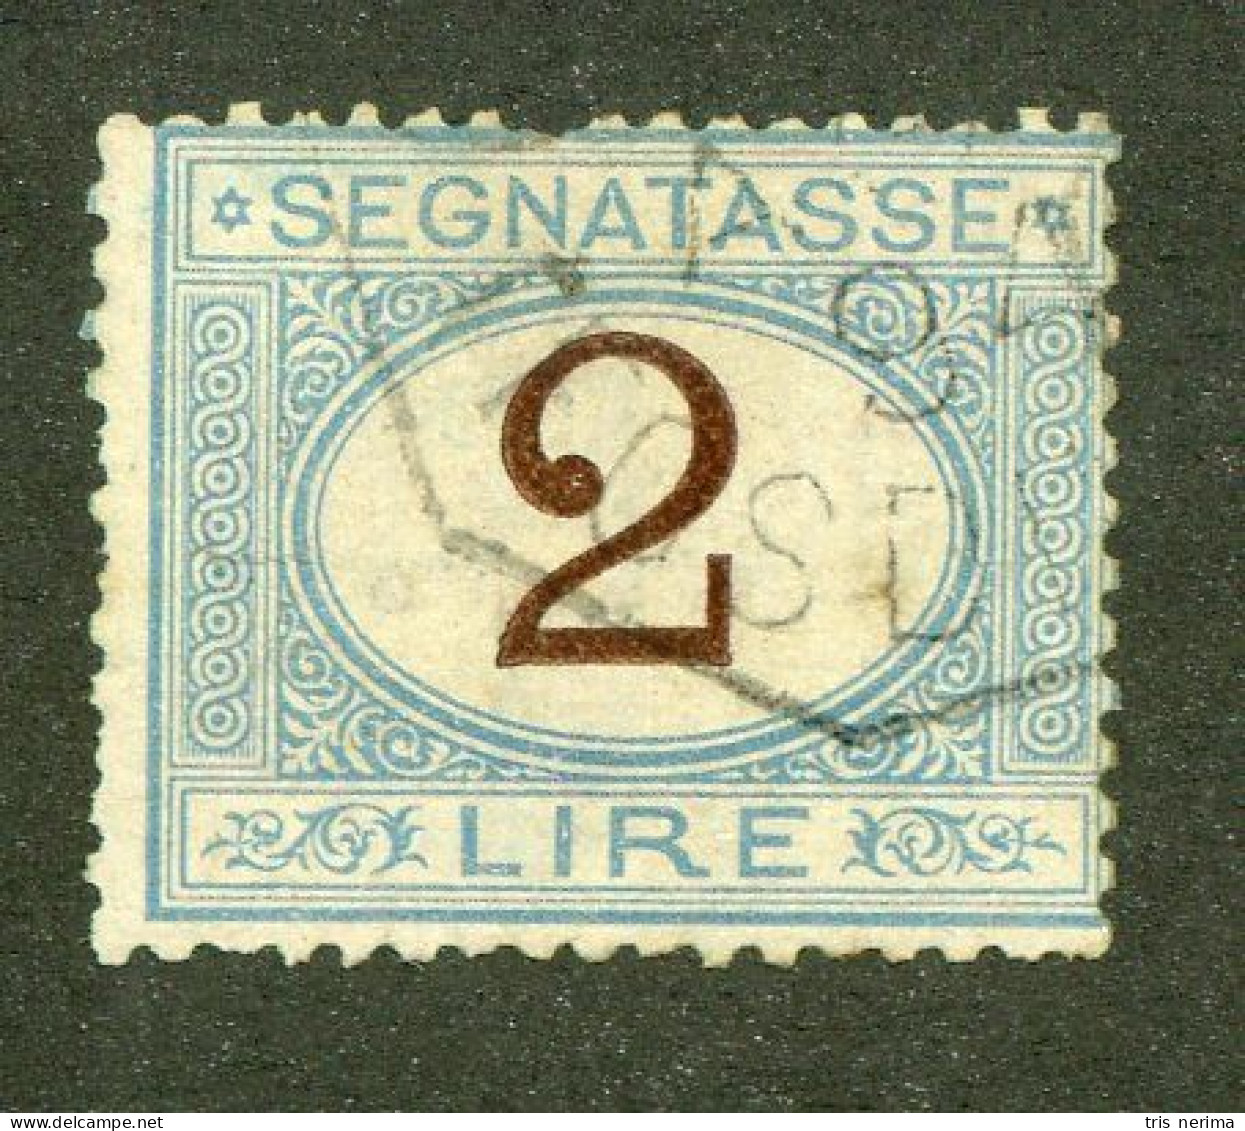 995 Italy 1870 Scott #J15 Used (Lower Bids 20% Off) - Postage Due